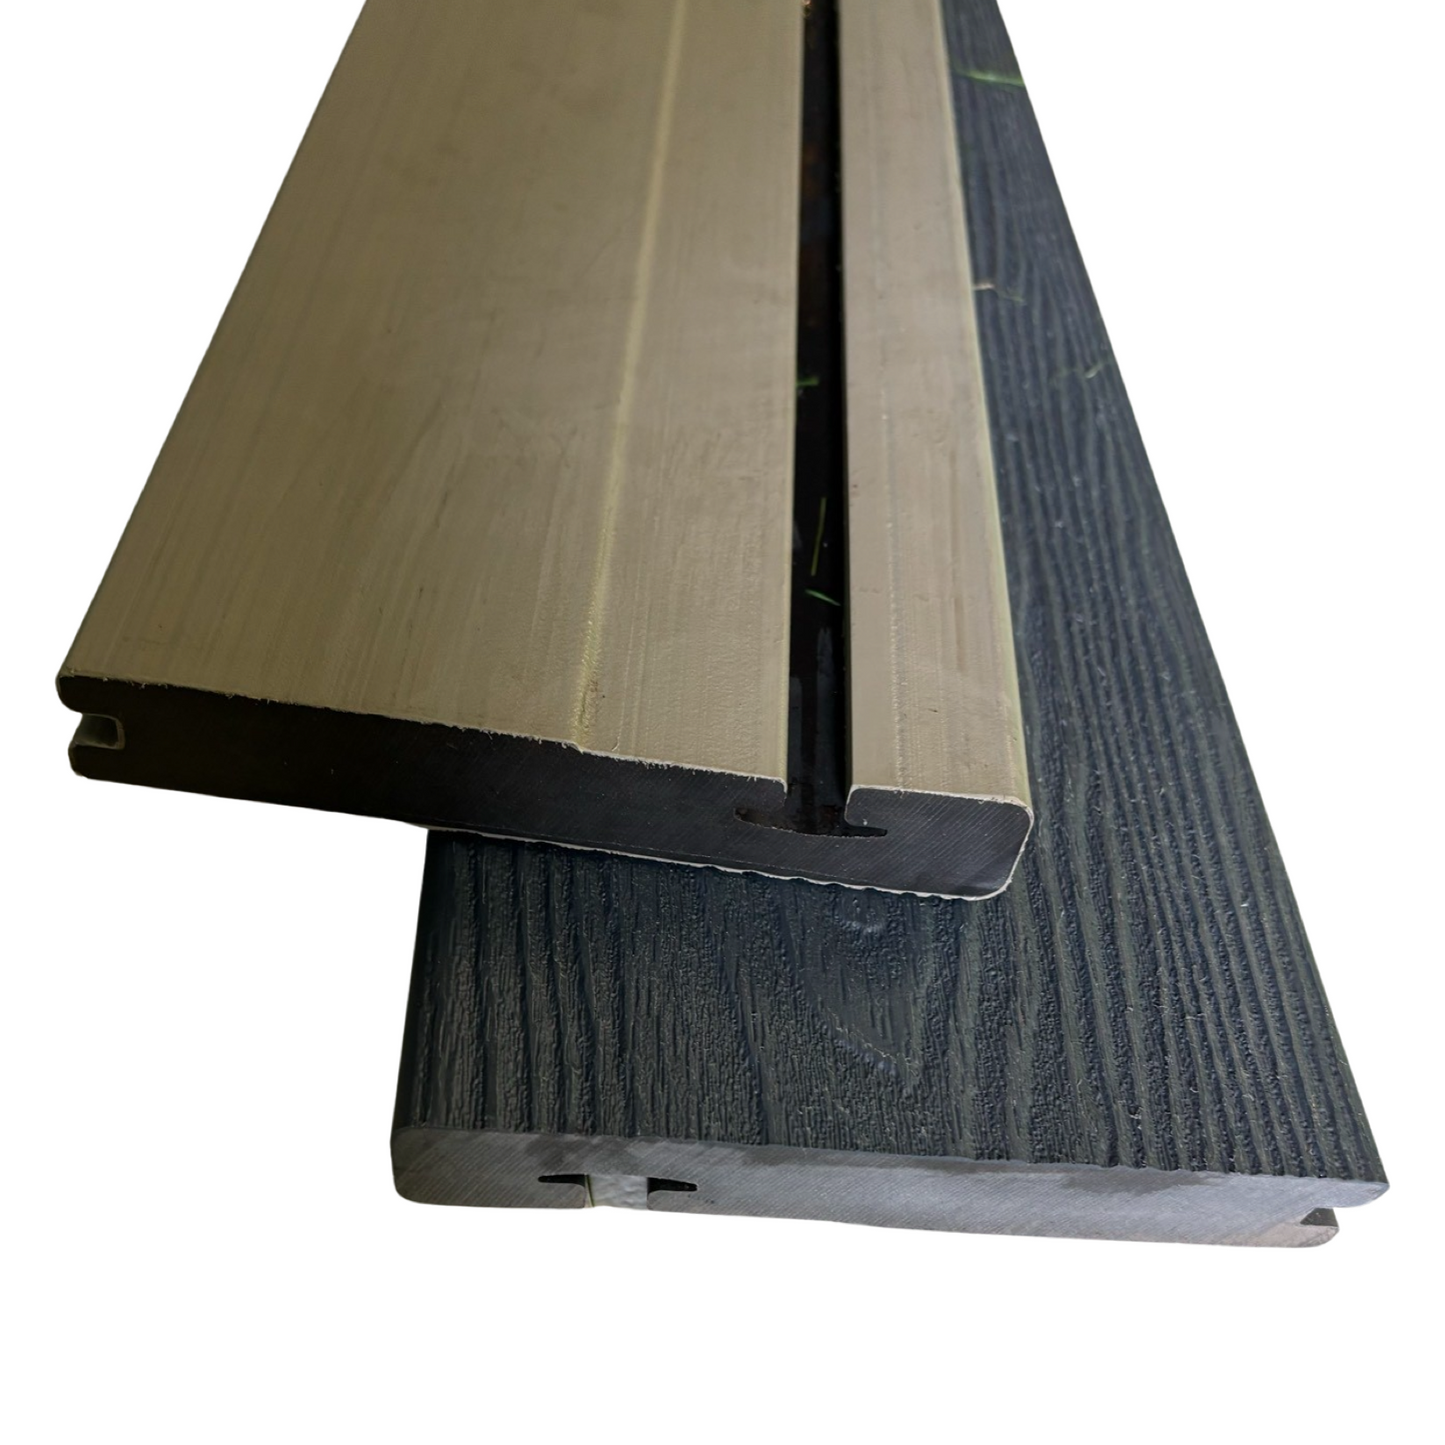 DUAL sided 3.6m Capped Decking Bullnose Board